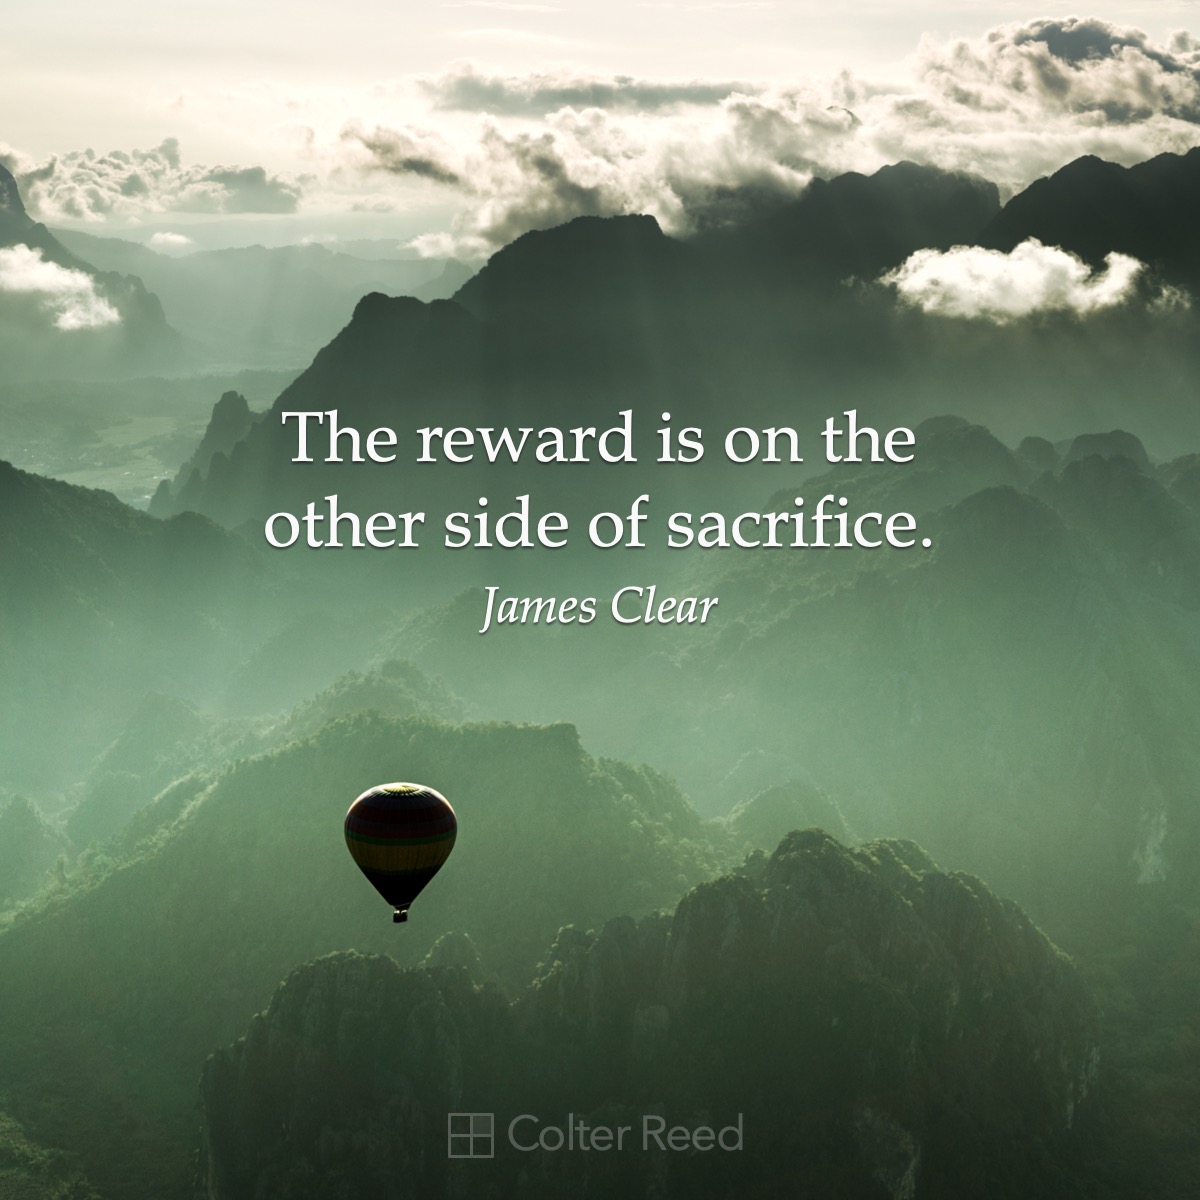 The reward is on the other side of sacrifice. —James Clear